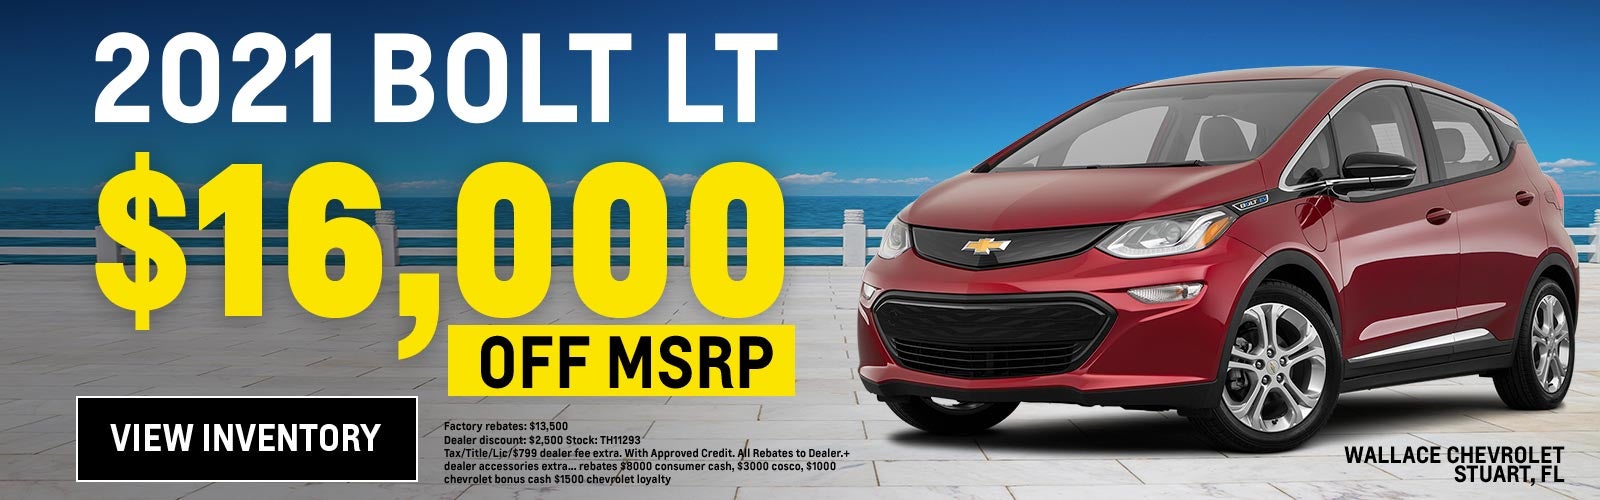 2021 Chevy Bolt Special Offer